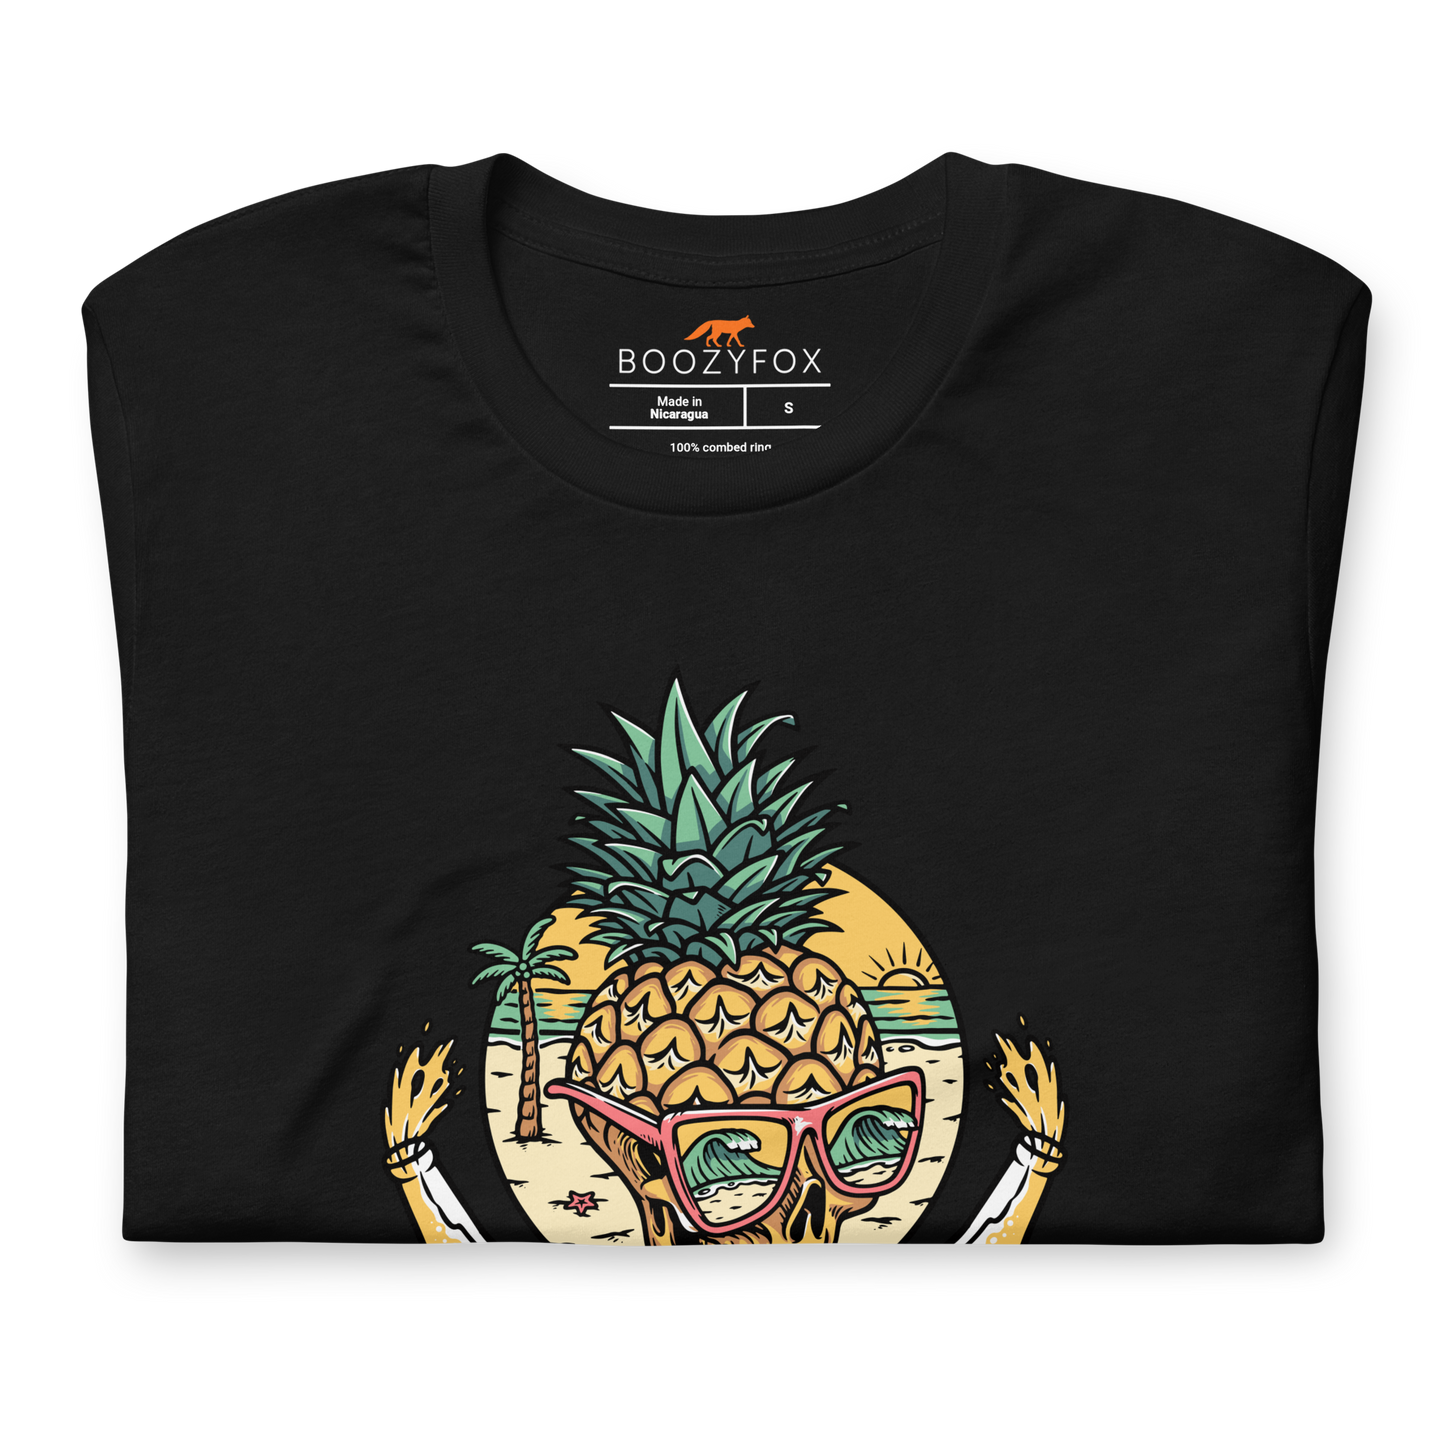 Front details of a Black Premium Tropical Mayhem Tee featuring a Crazy Pineapple Skull graphic on the chest - Funny Graphic Pineapple Tees - Boozy Fox